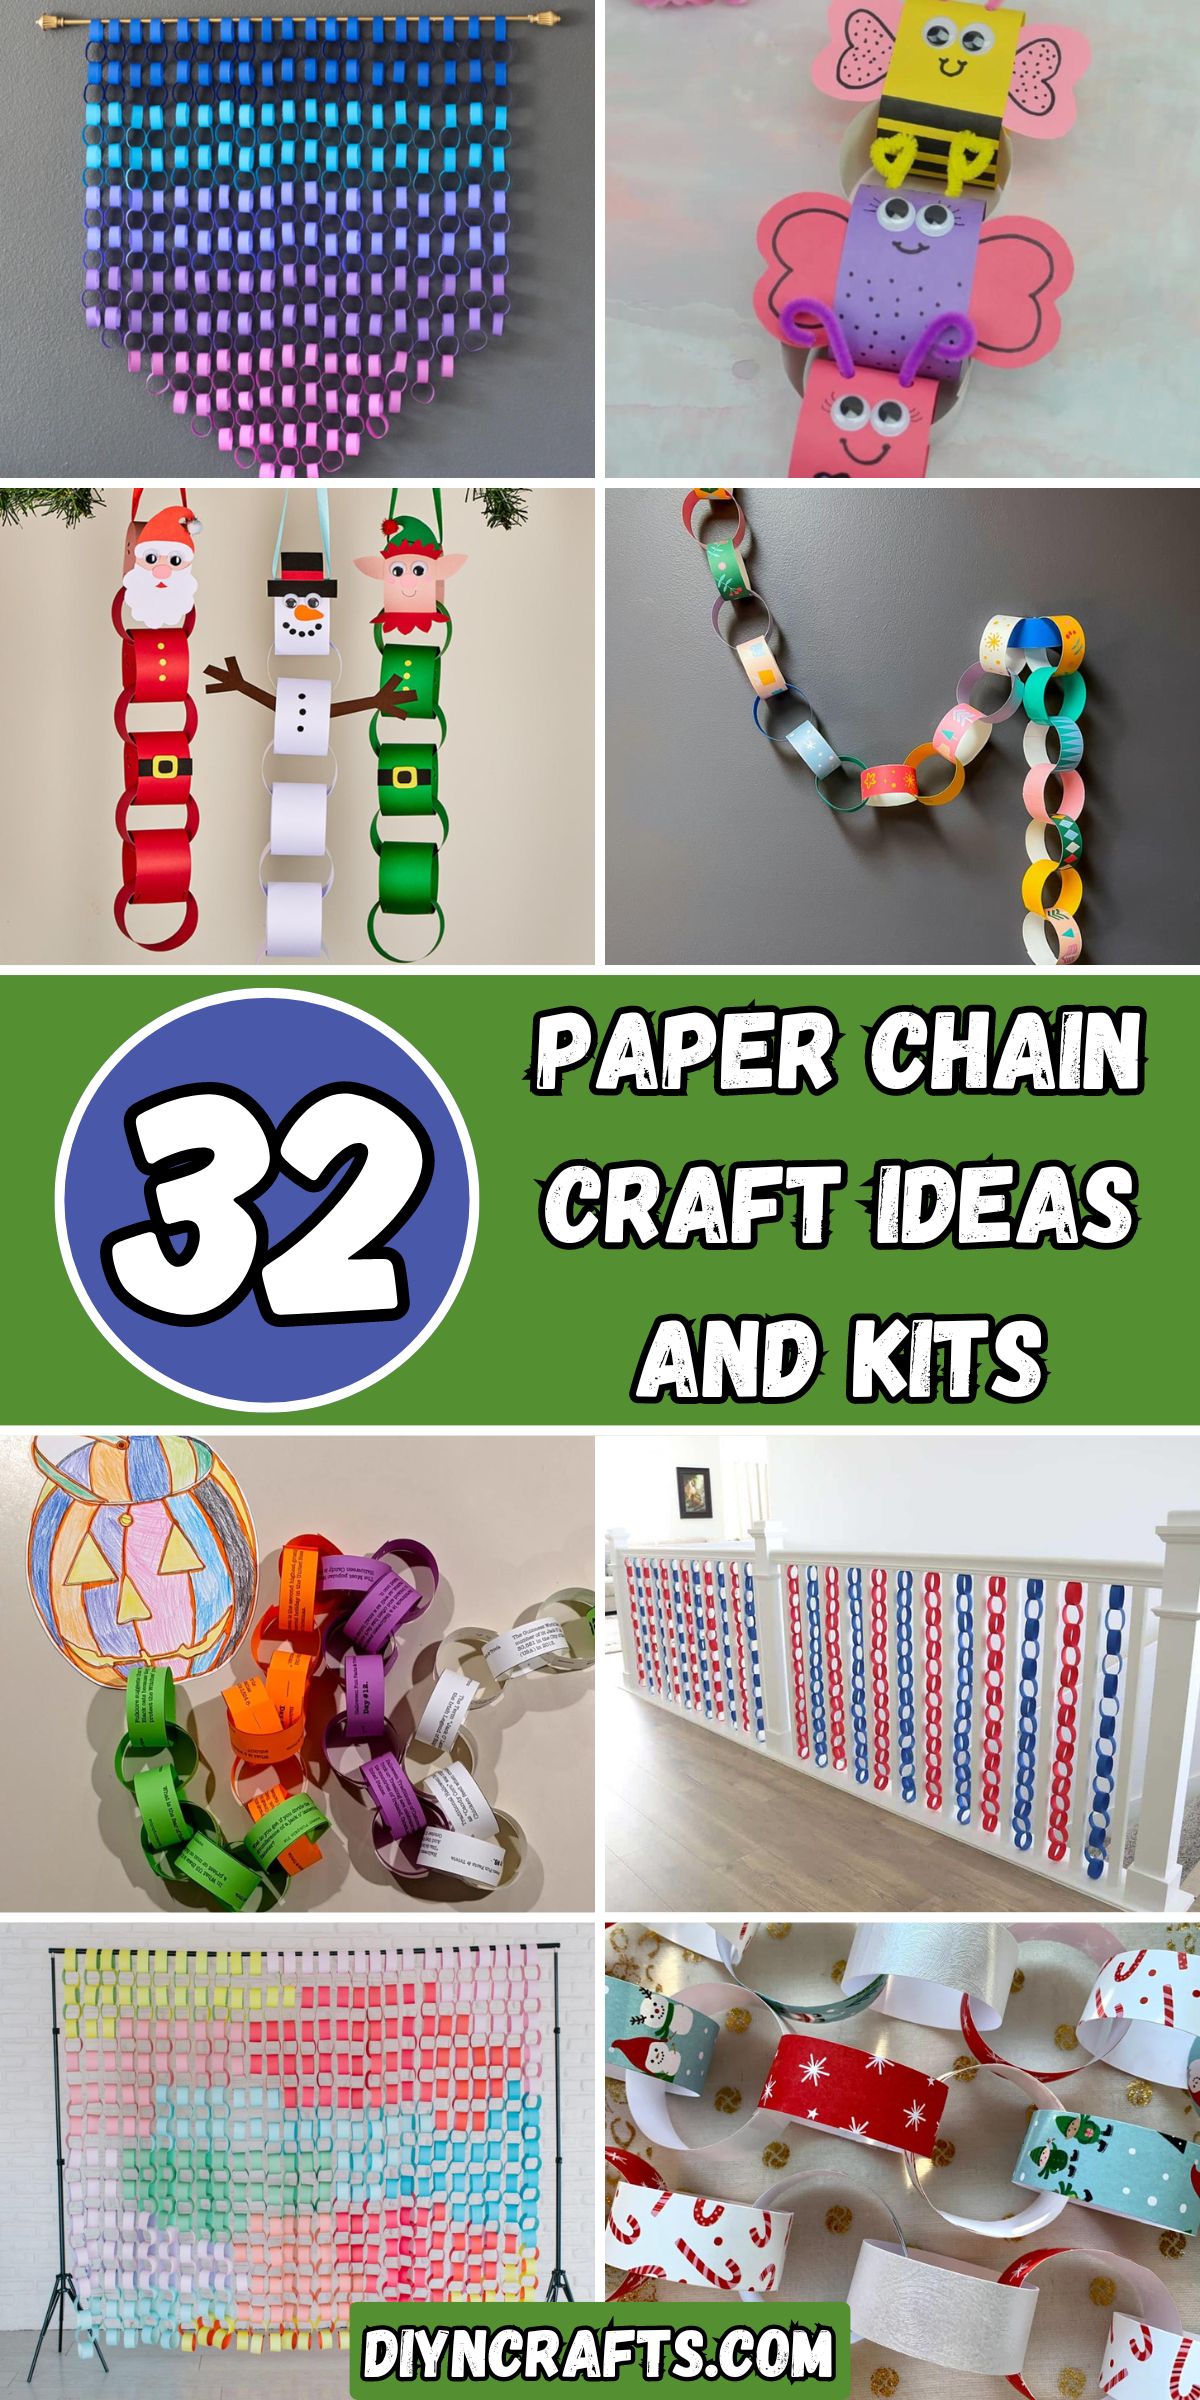 32 Paper Chain Craft Ideas and Kits collage.